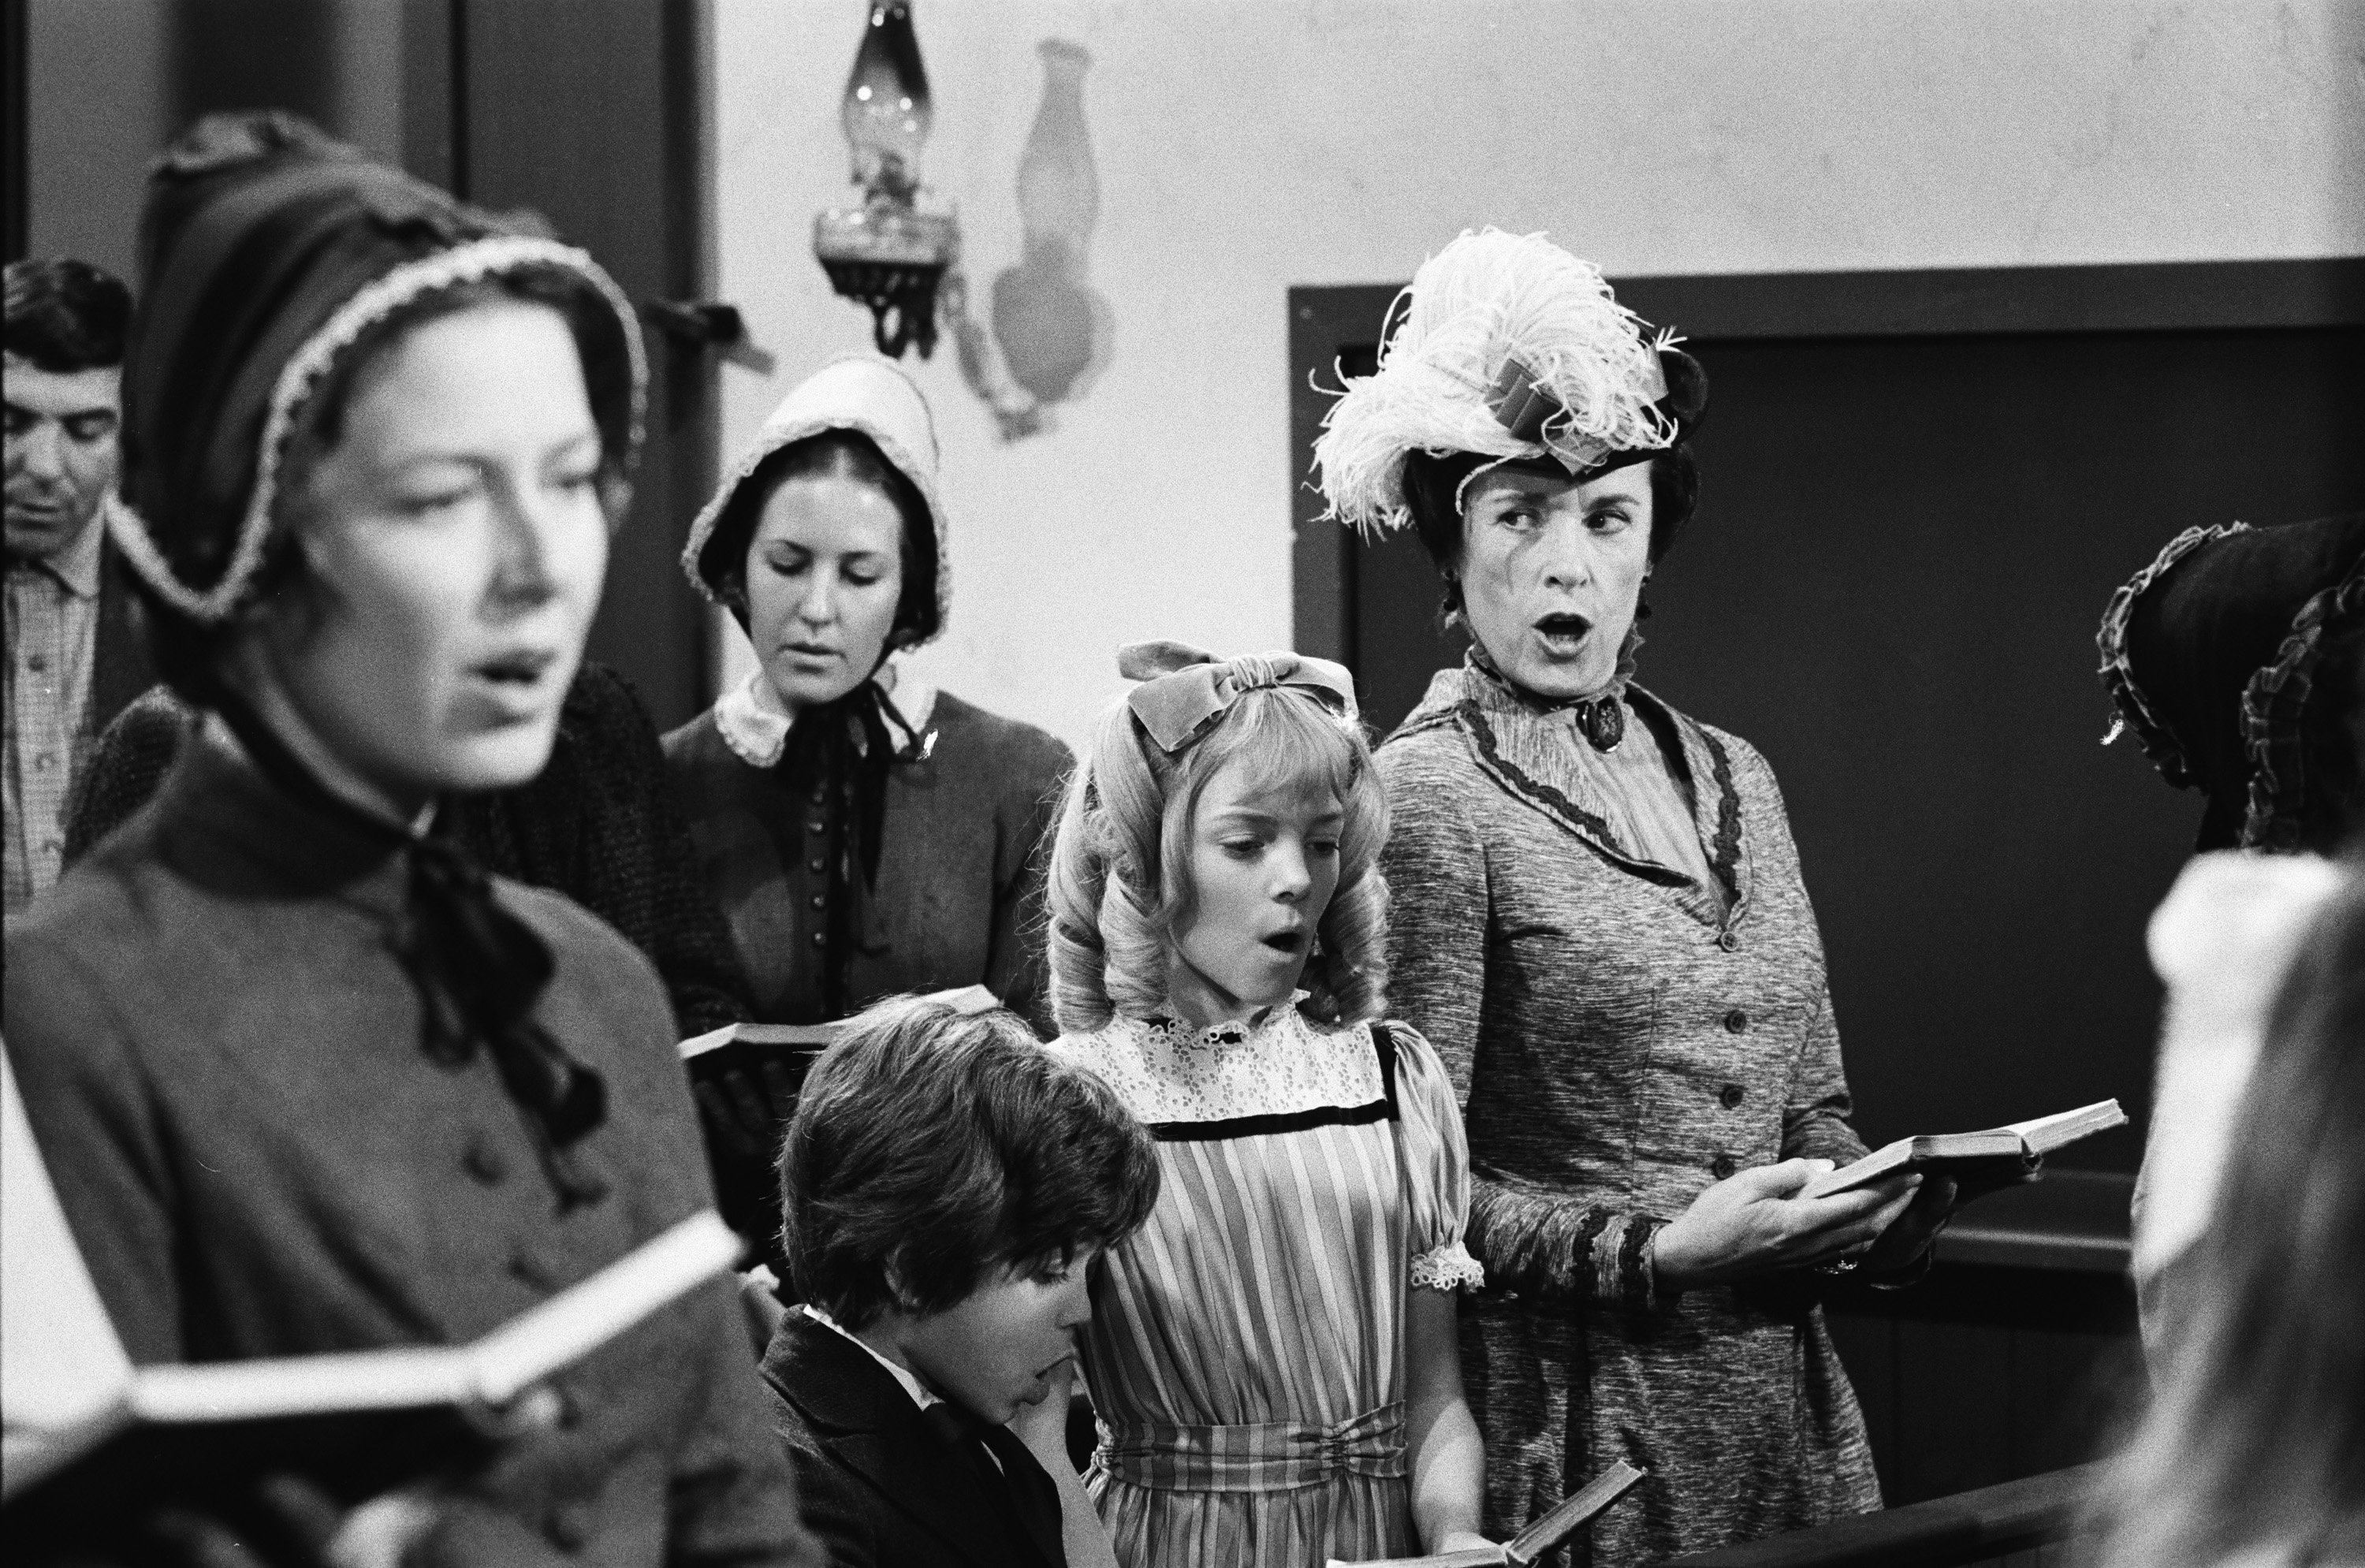 A scene from 'Little House on the Prairie'